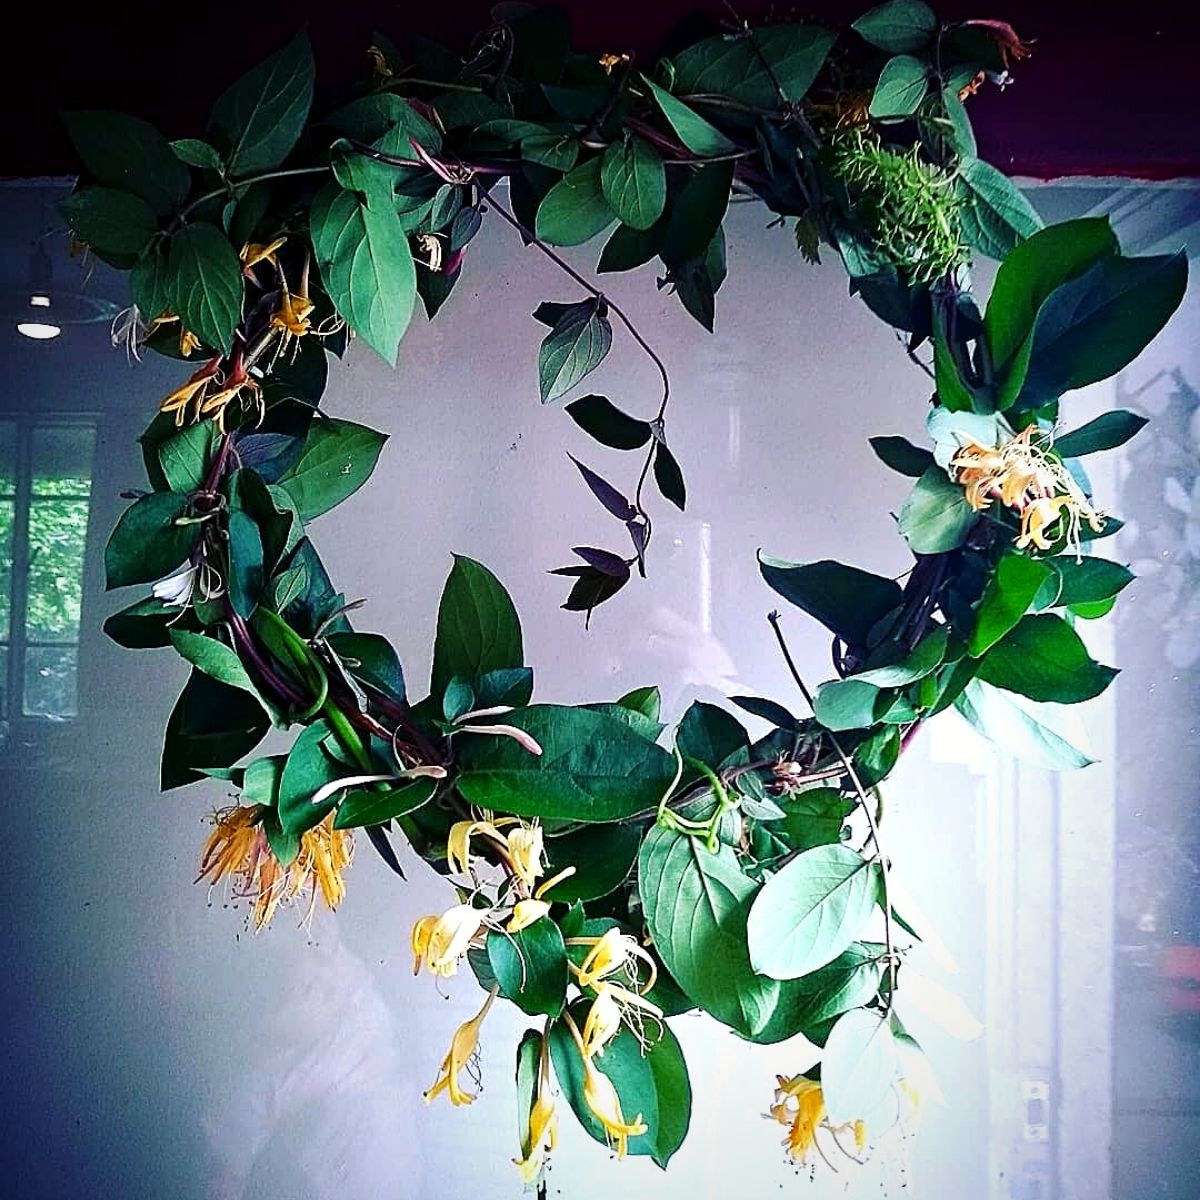 wreath made of honeysuckle flowers and foliage